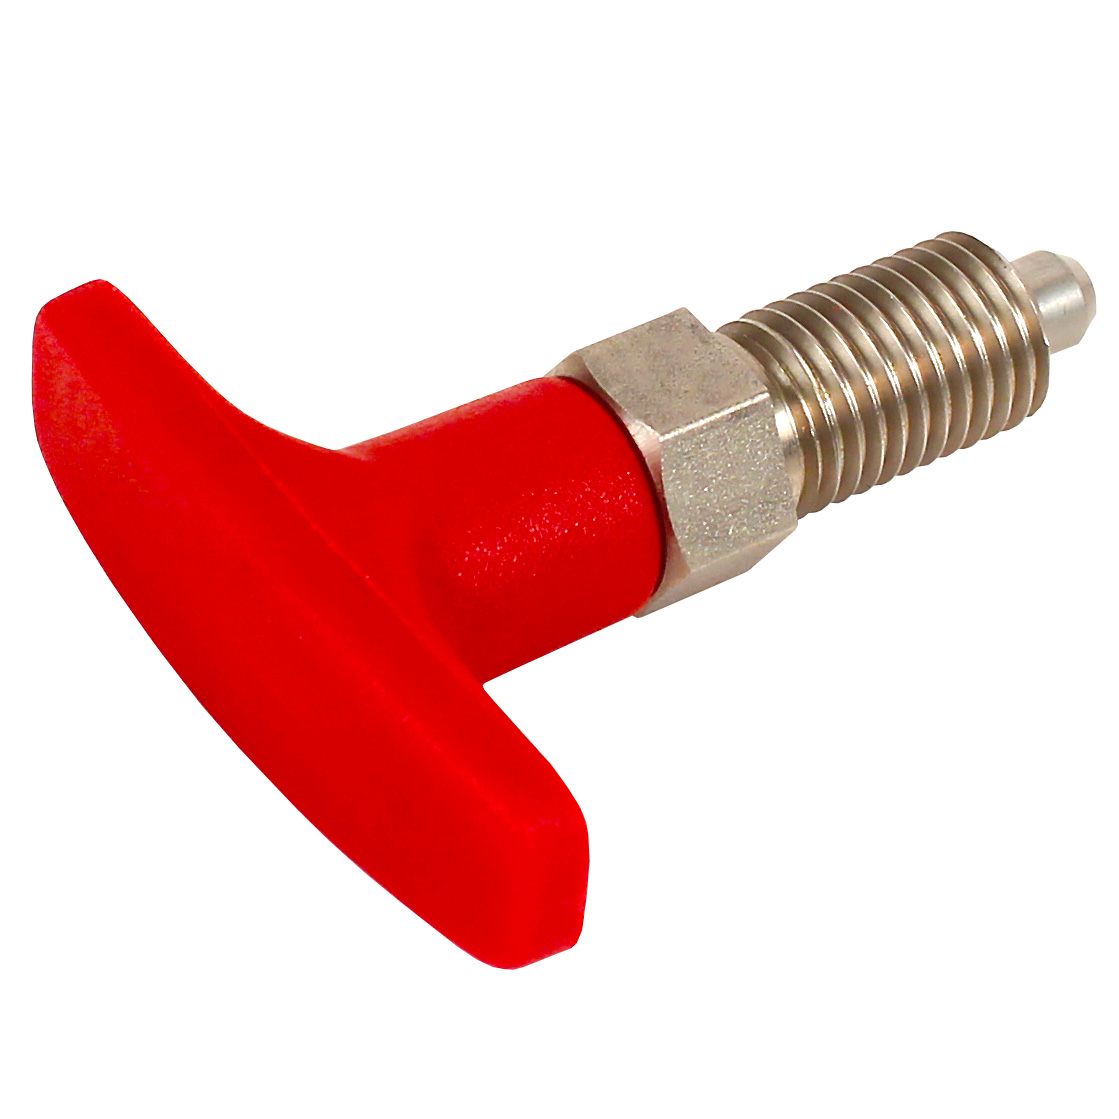 Locking bolt - with T handle - Stainless steel - thermoplastic - Red